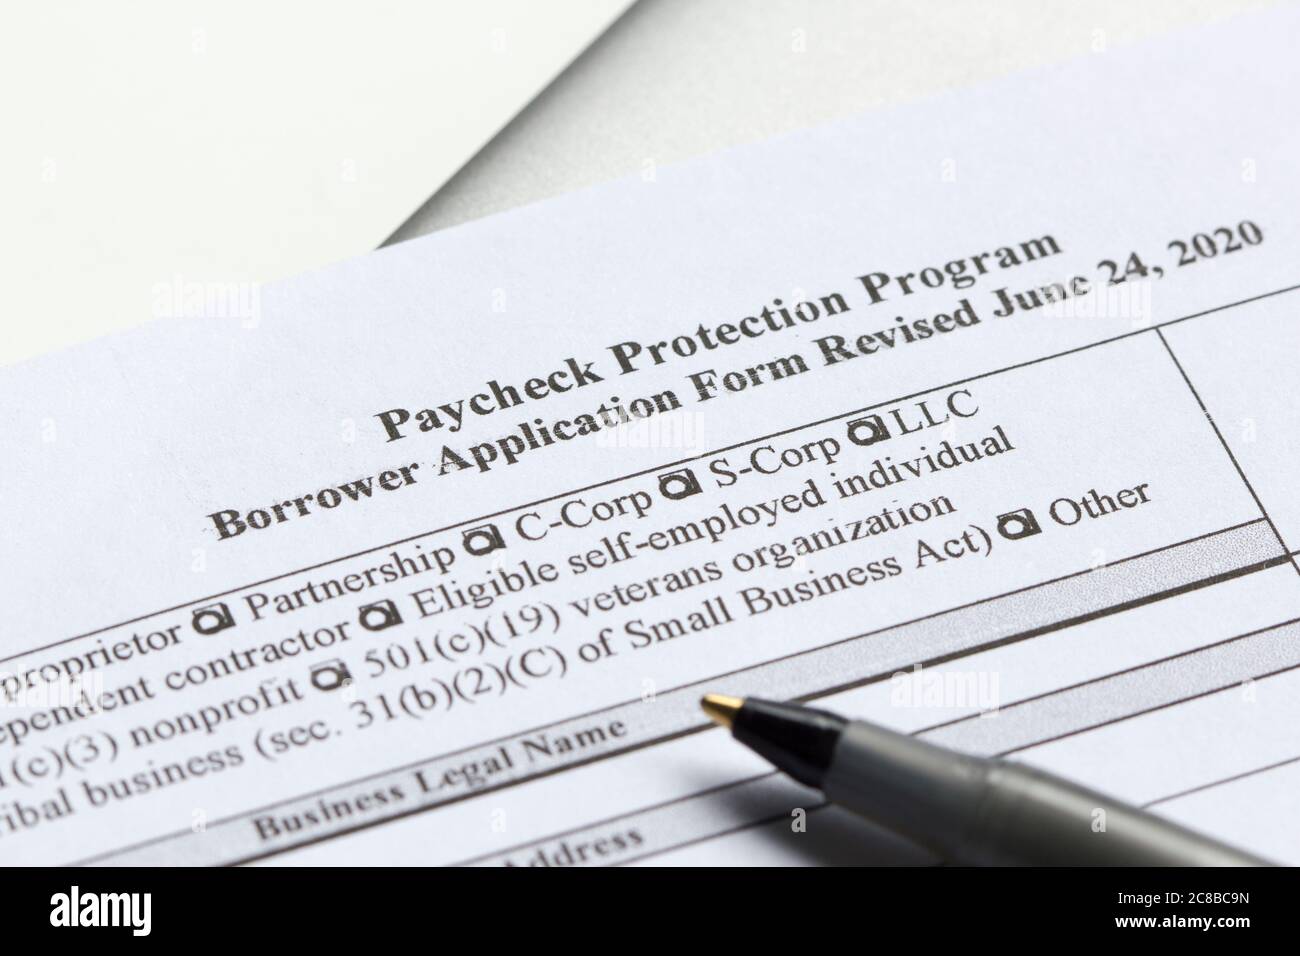 The Paycheck Protection Program (PPP) Borrower Application Form. PPP loan provides an incentive for small businesses to keep their workers on payroll. Stock Photo